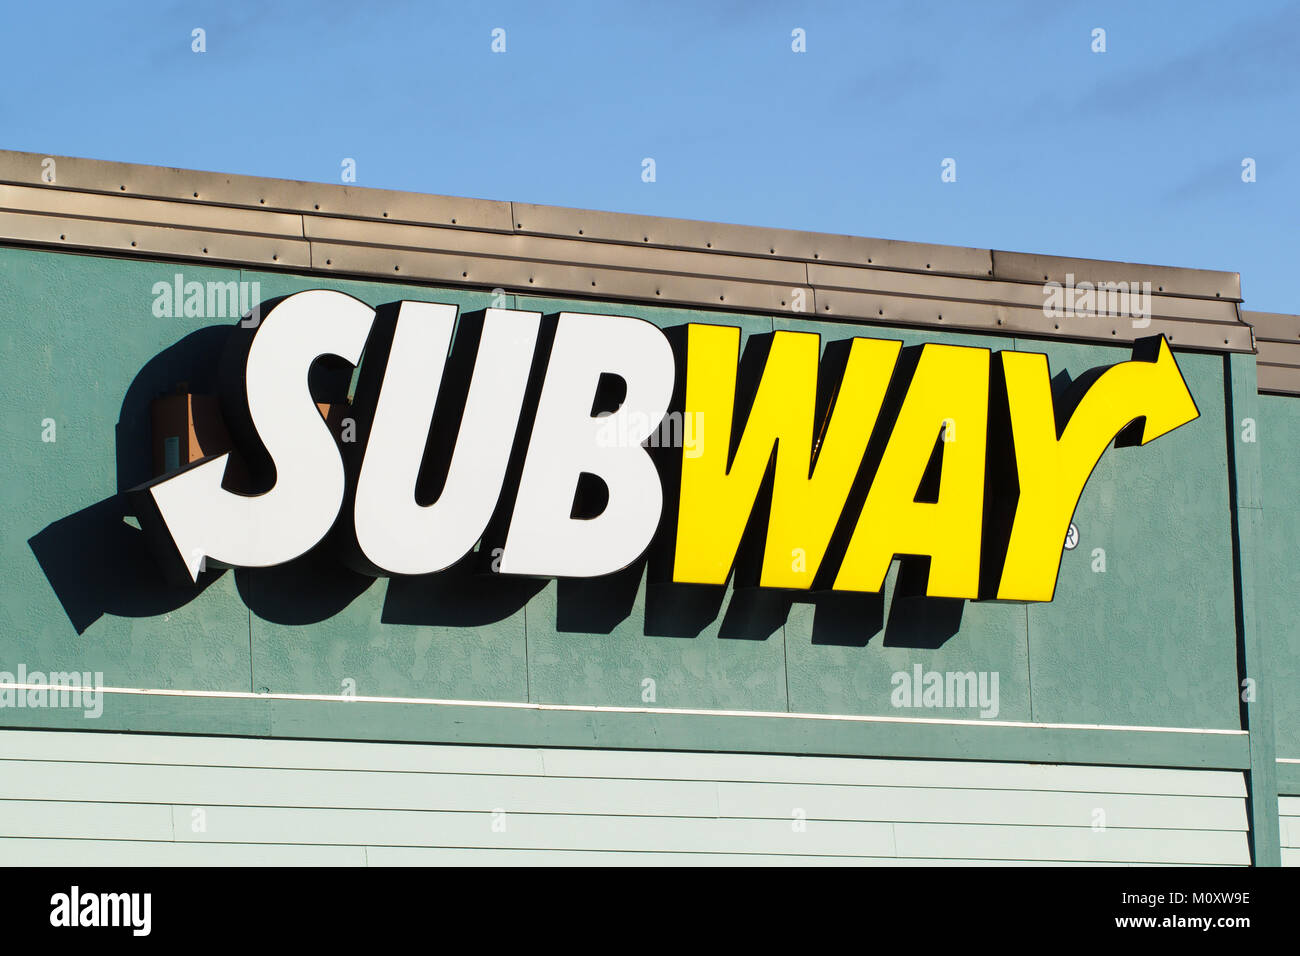 TRURO, CANADA - NOVEMBER 24, 2017: Subway restaurant sign. Subway is an American fast food franchise offering sub sandwiches and salads. Stock Photo